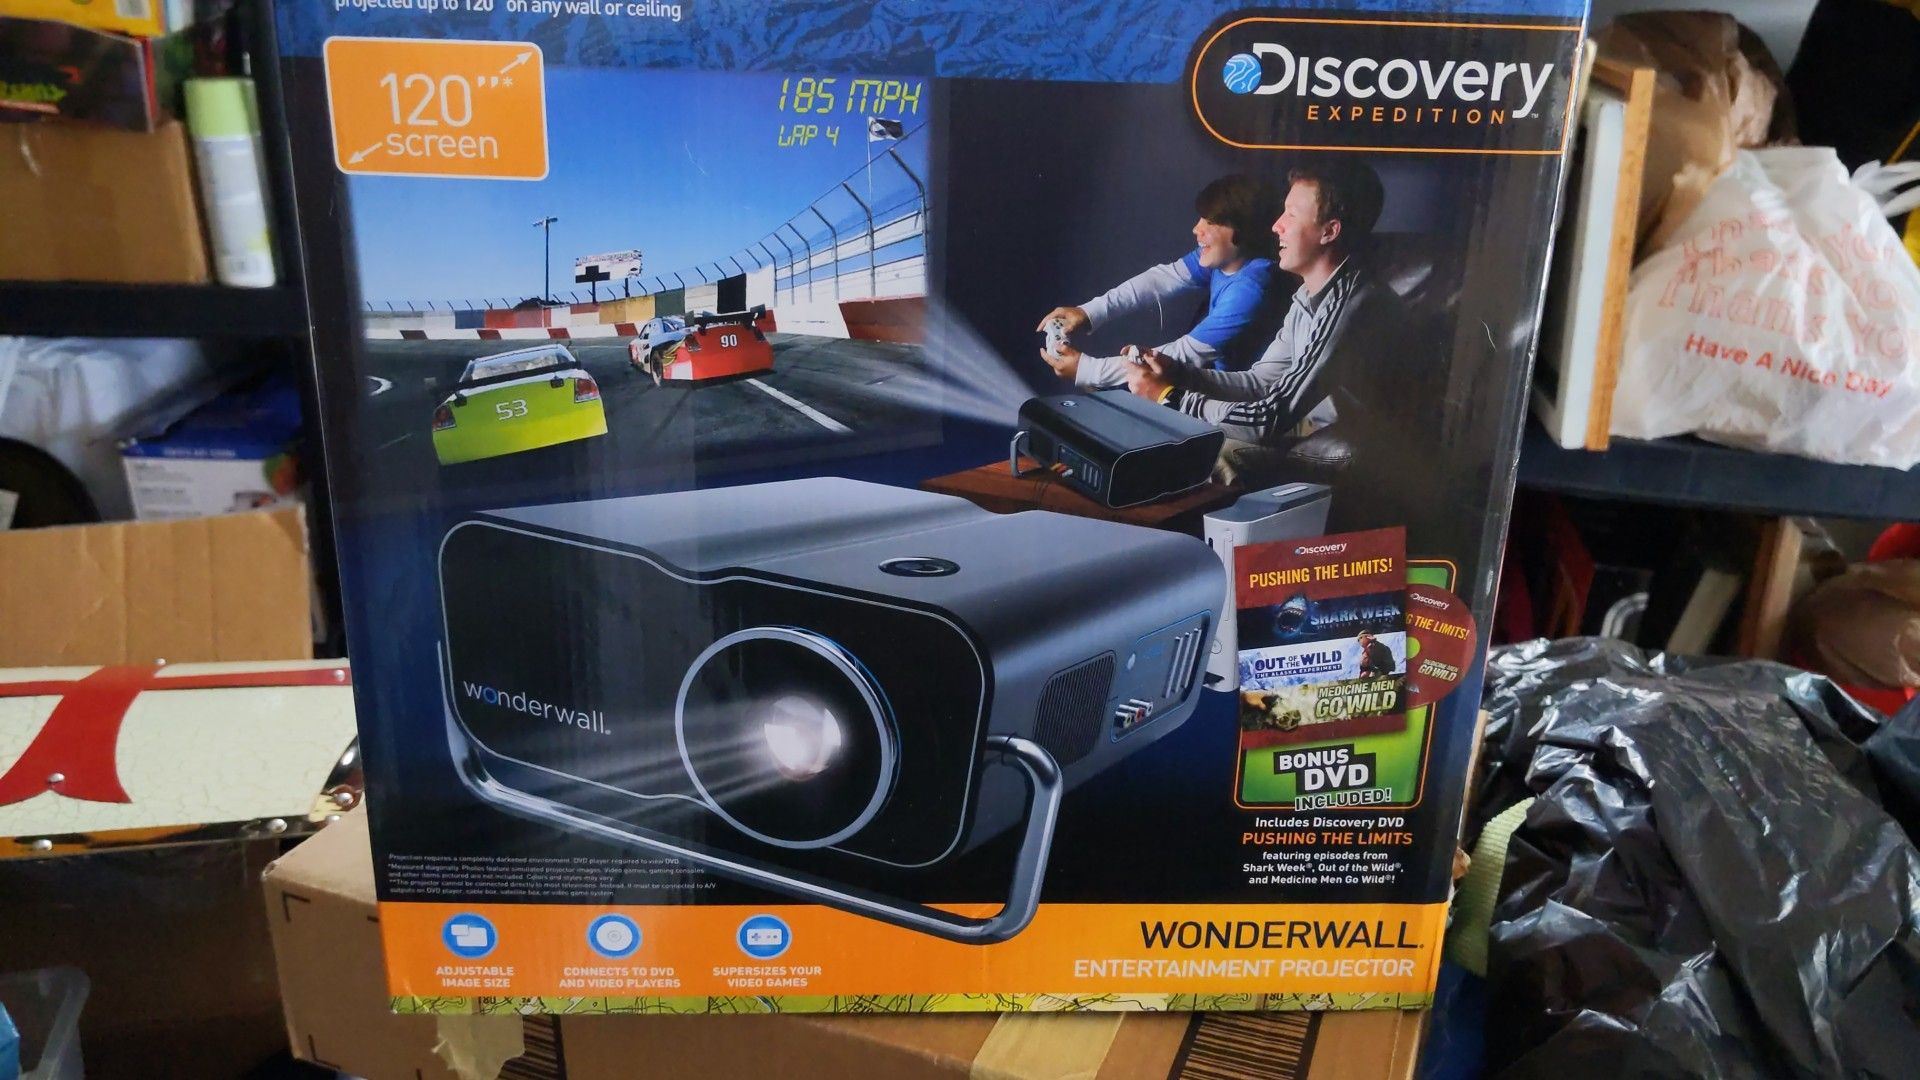 Discovery Expedition Wonderwall projector